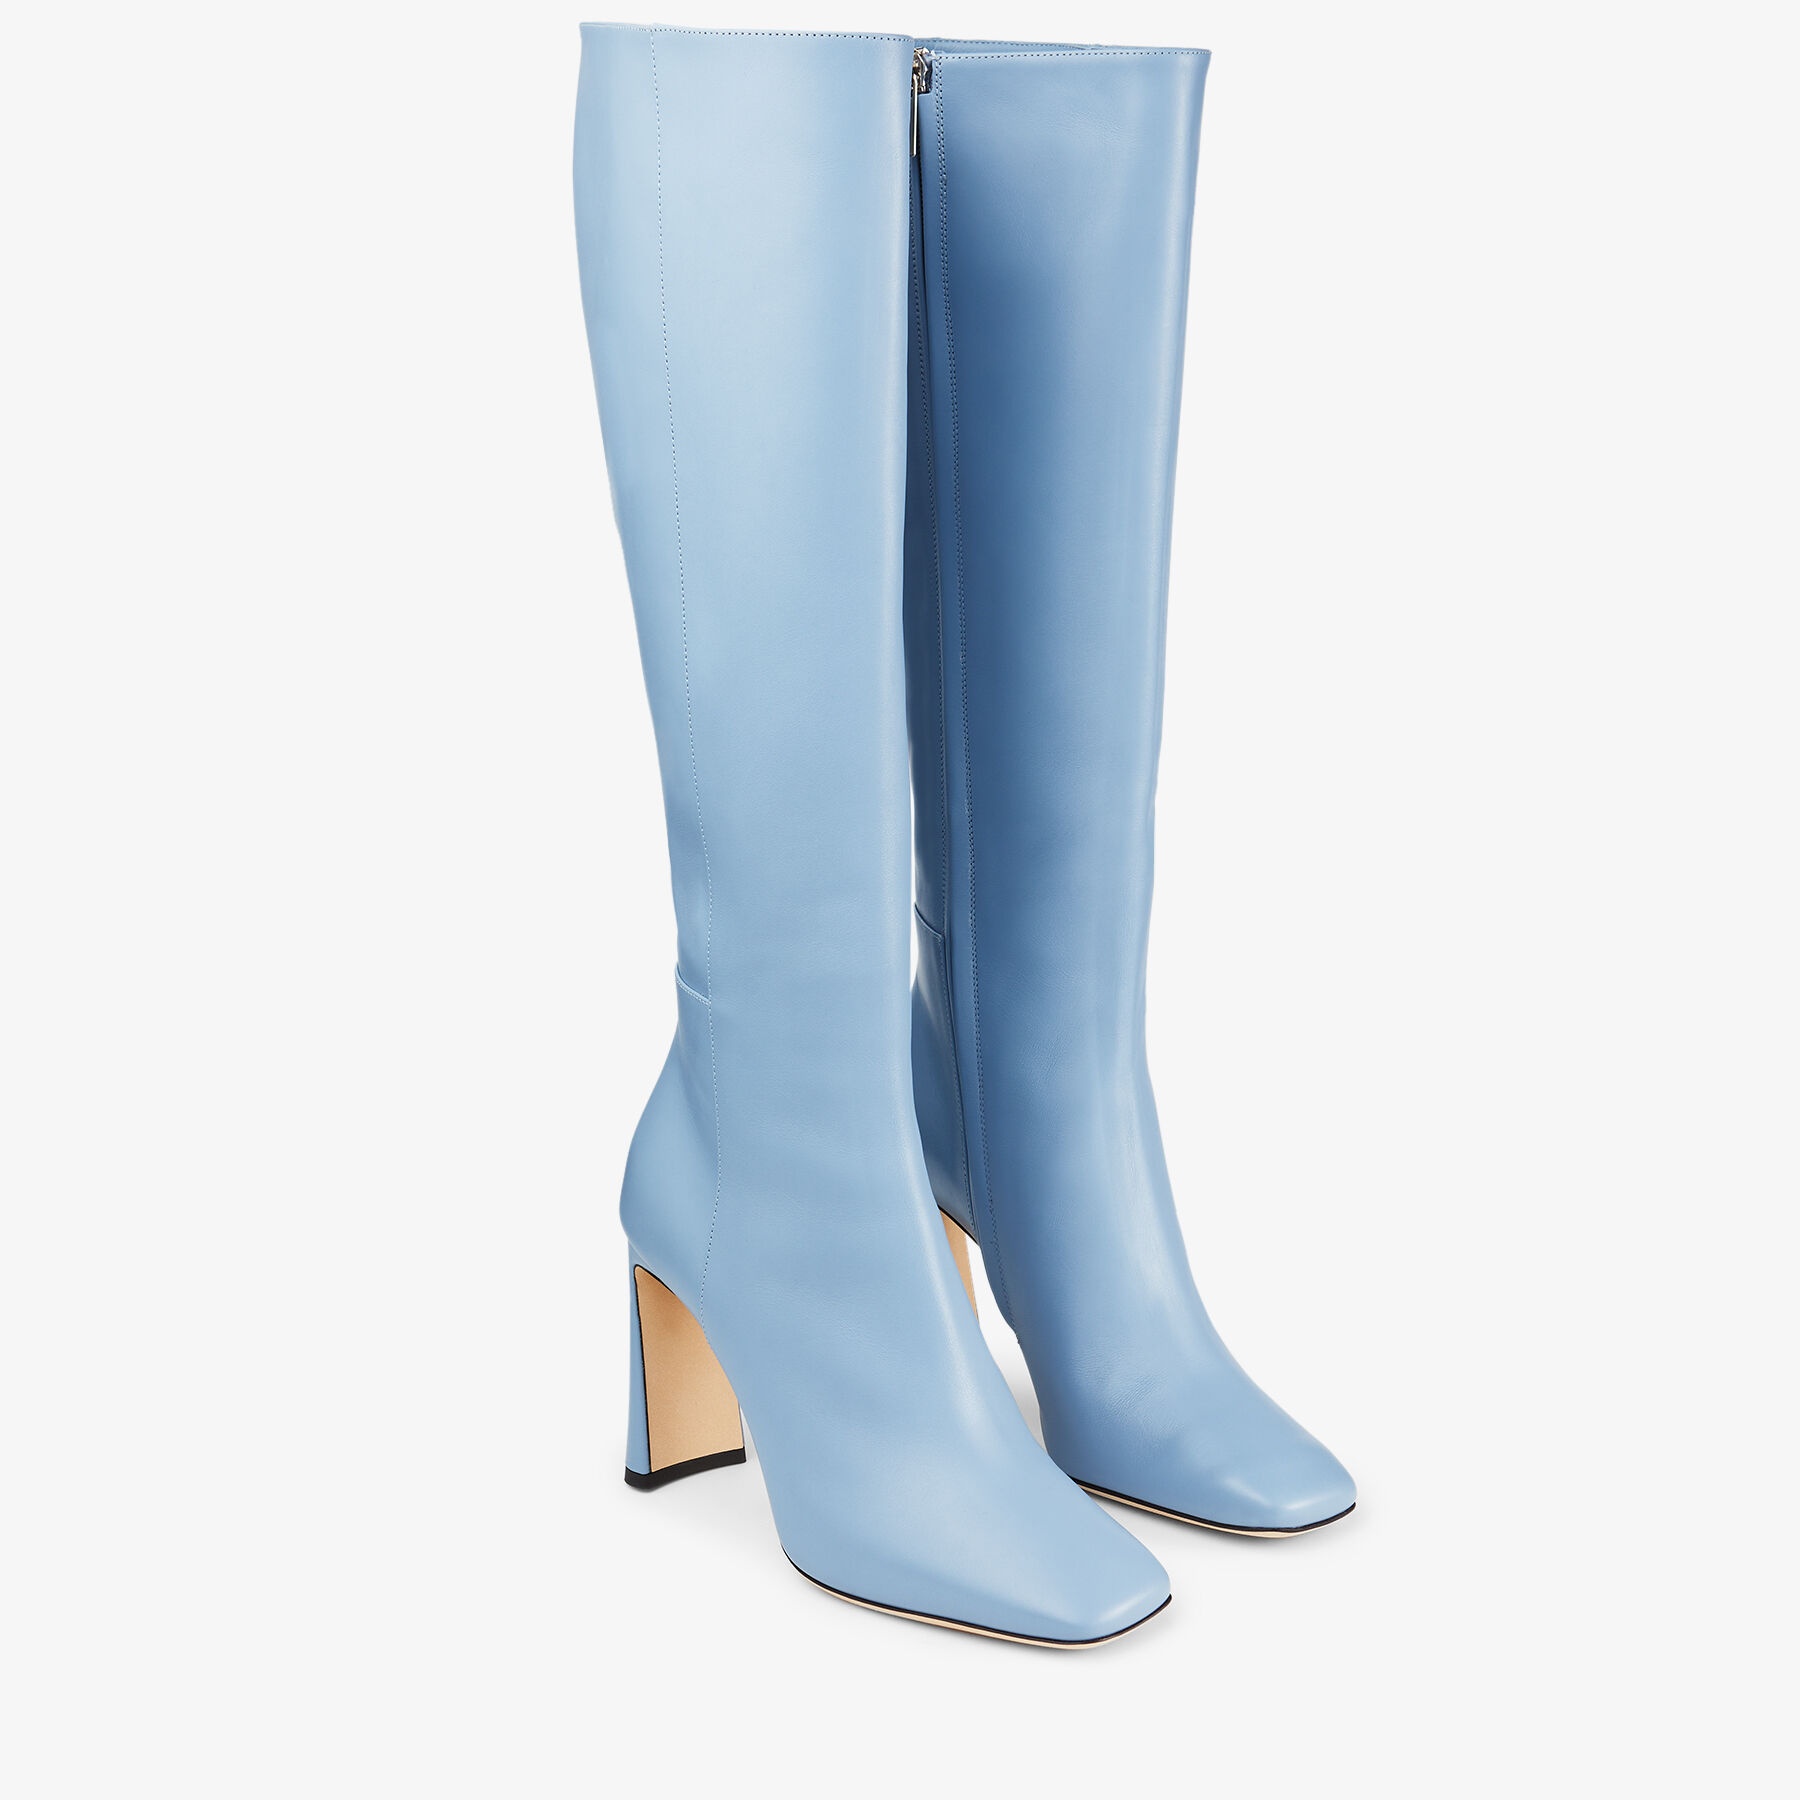 Kinsey 95
Smoky Blue Calf Leather Knee-High Boots - 3